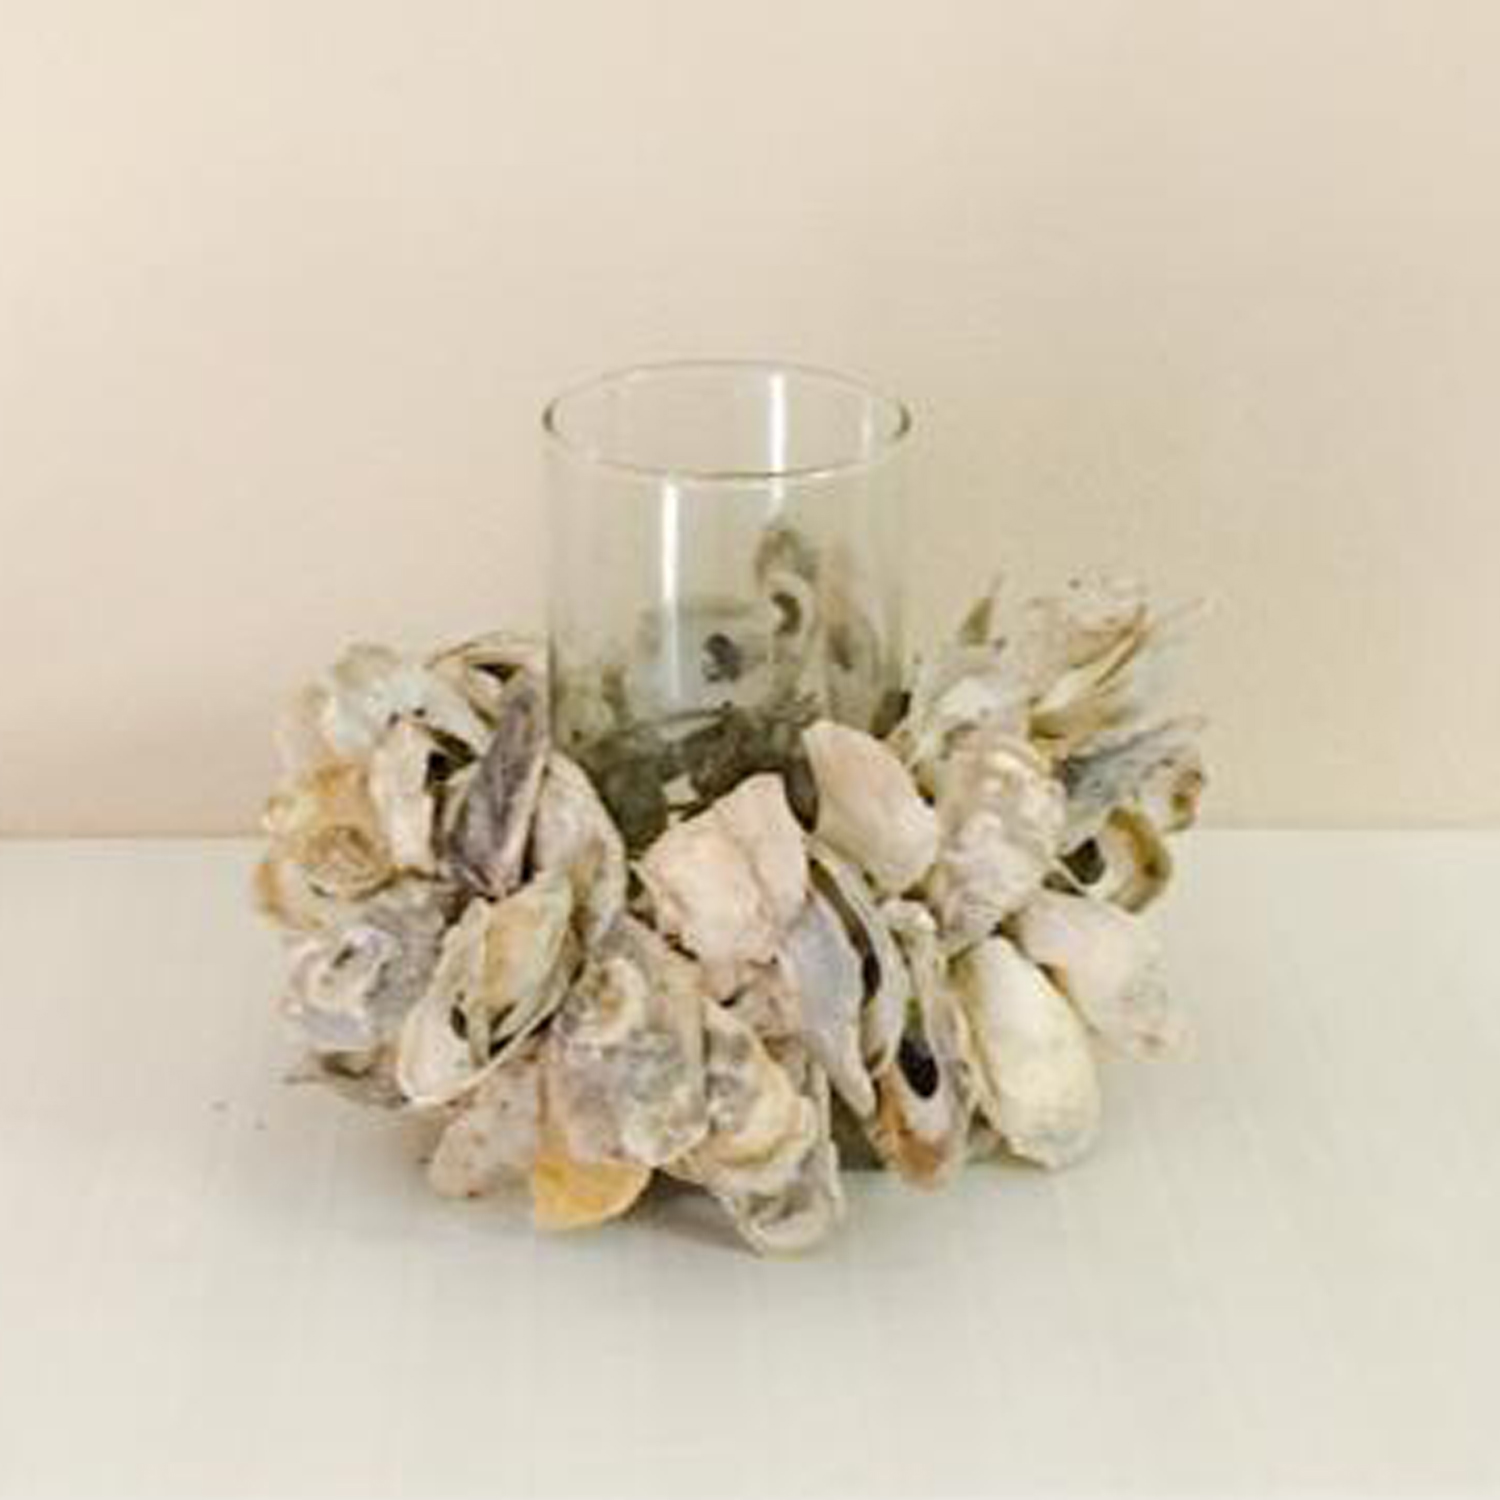 Small oyster shell votive candle holder